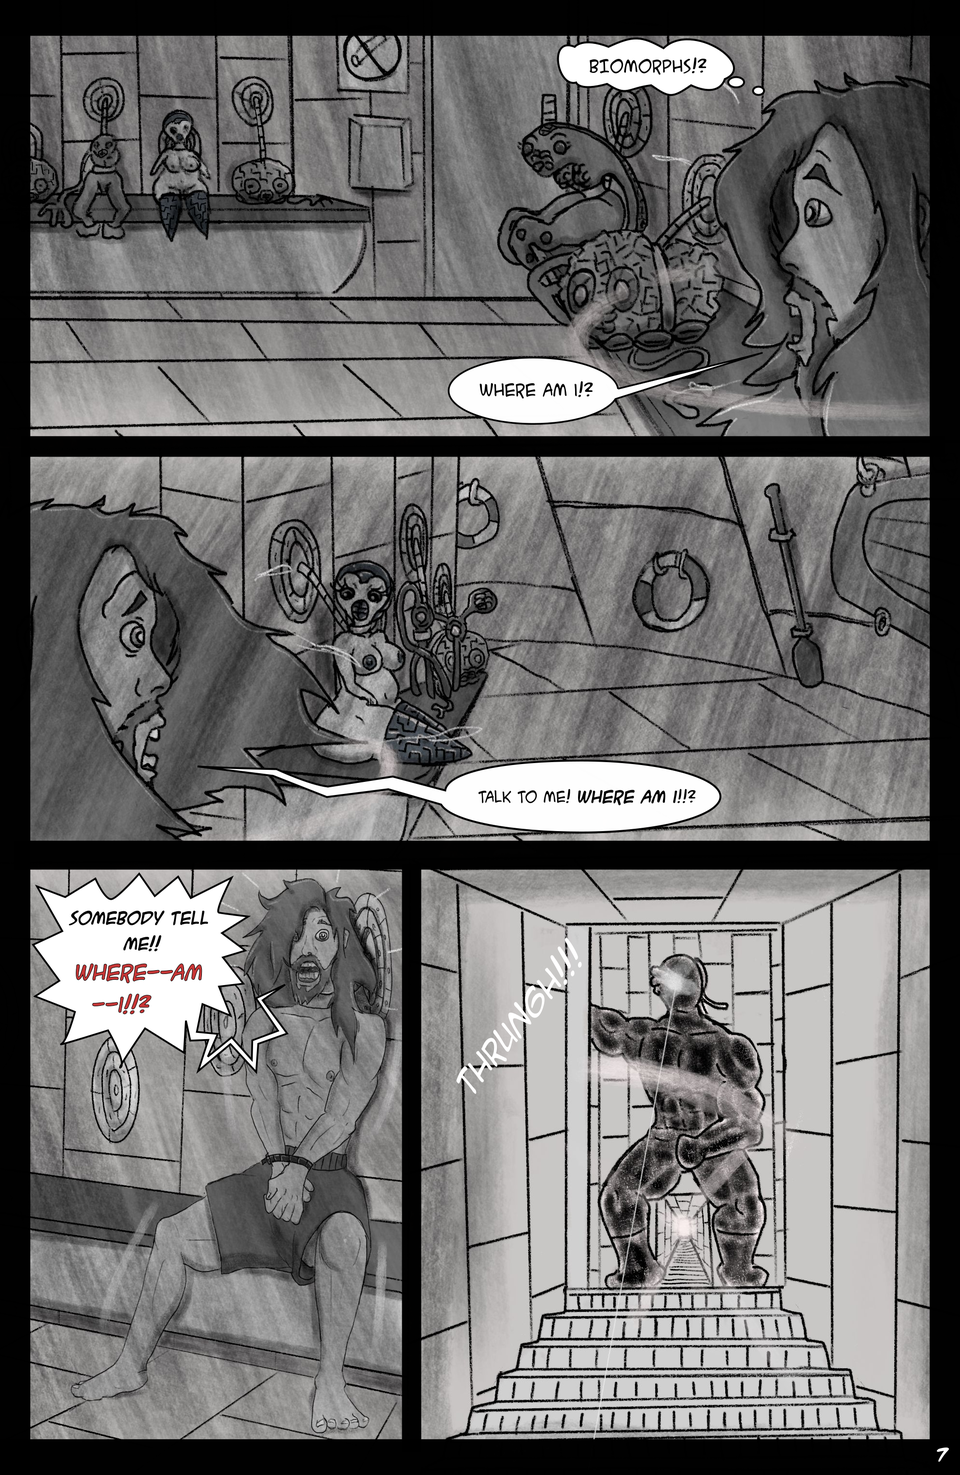 Issue #1 Page 7 - Down the hold